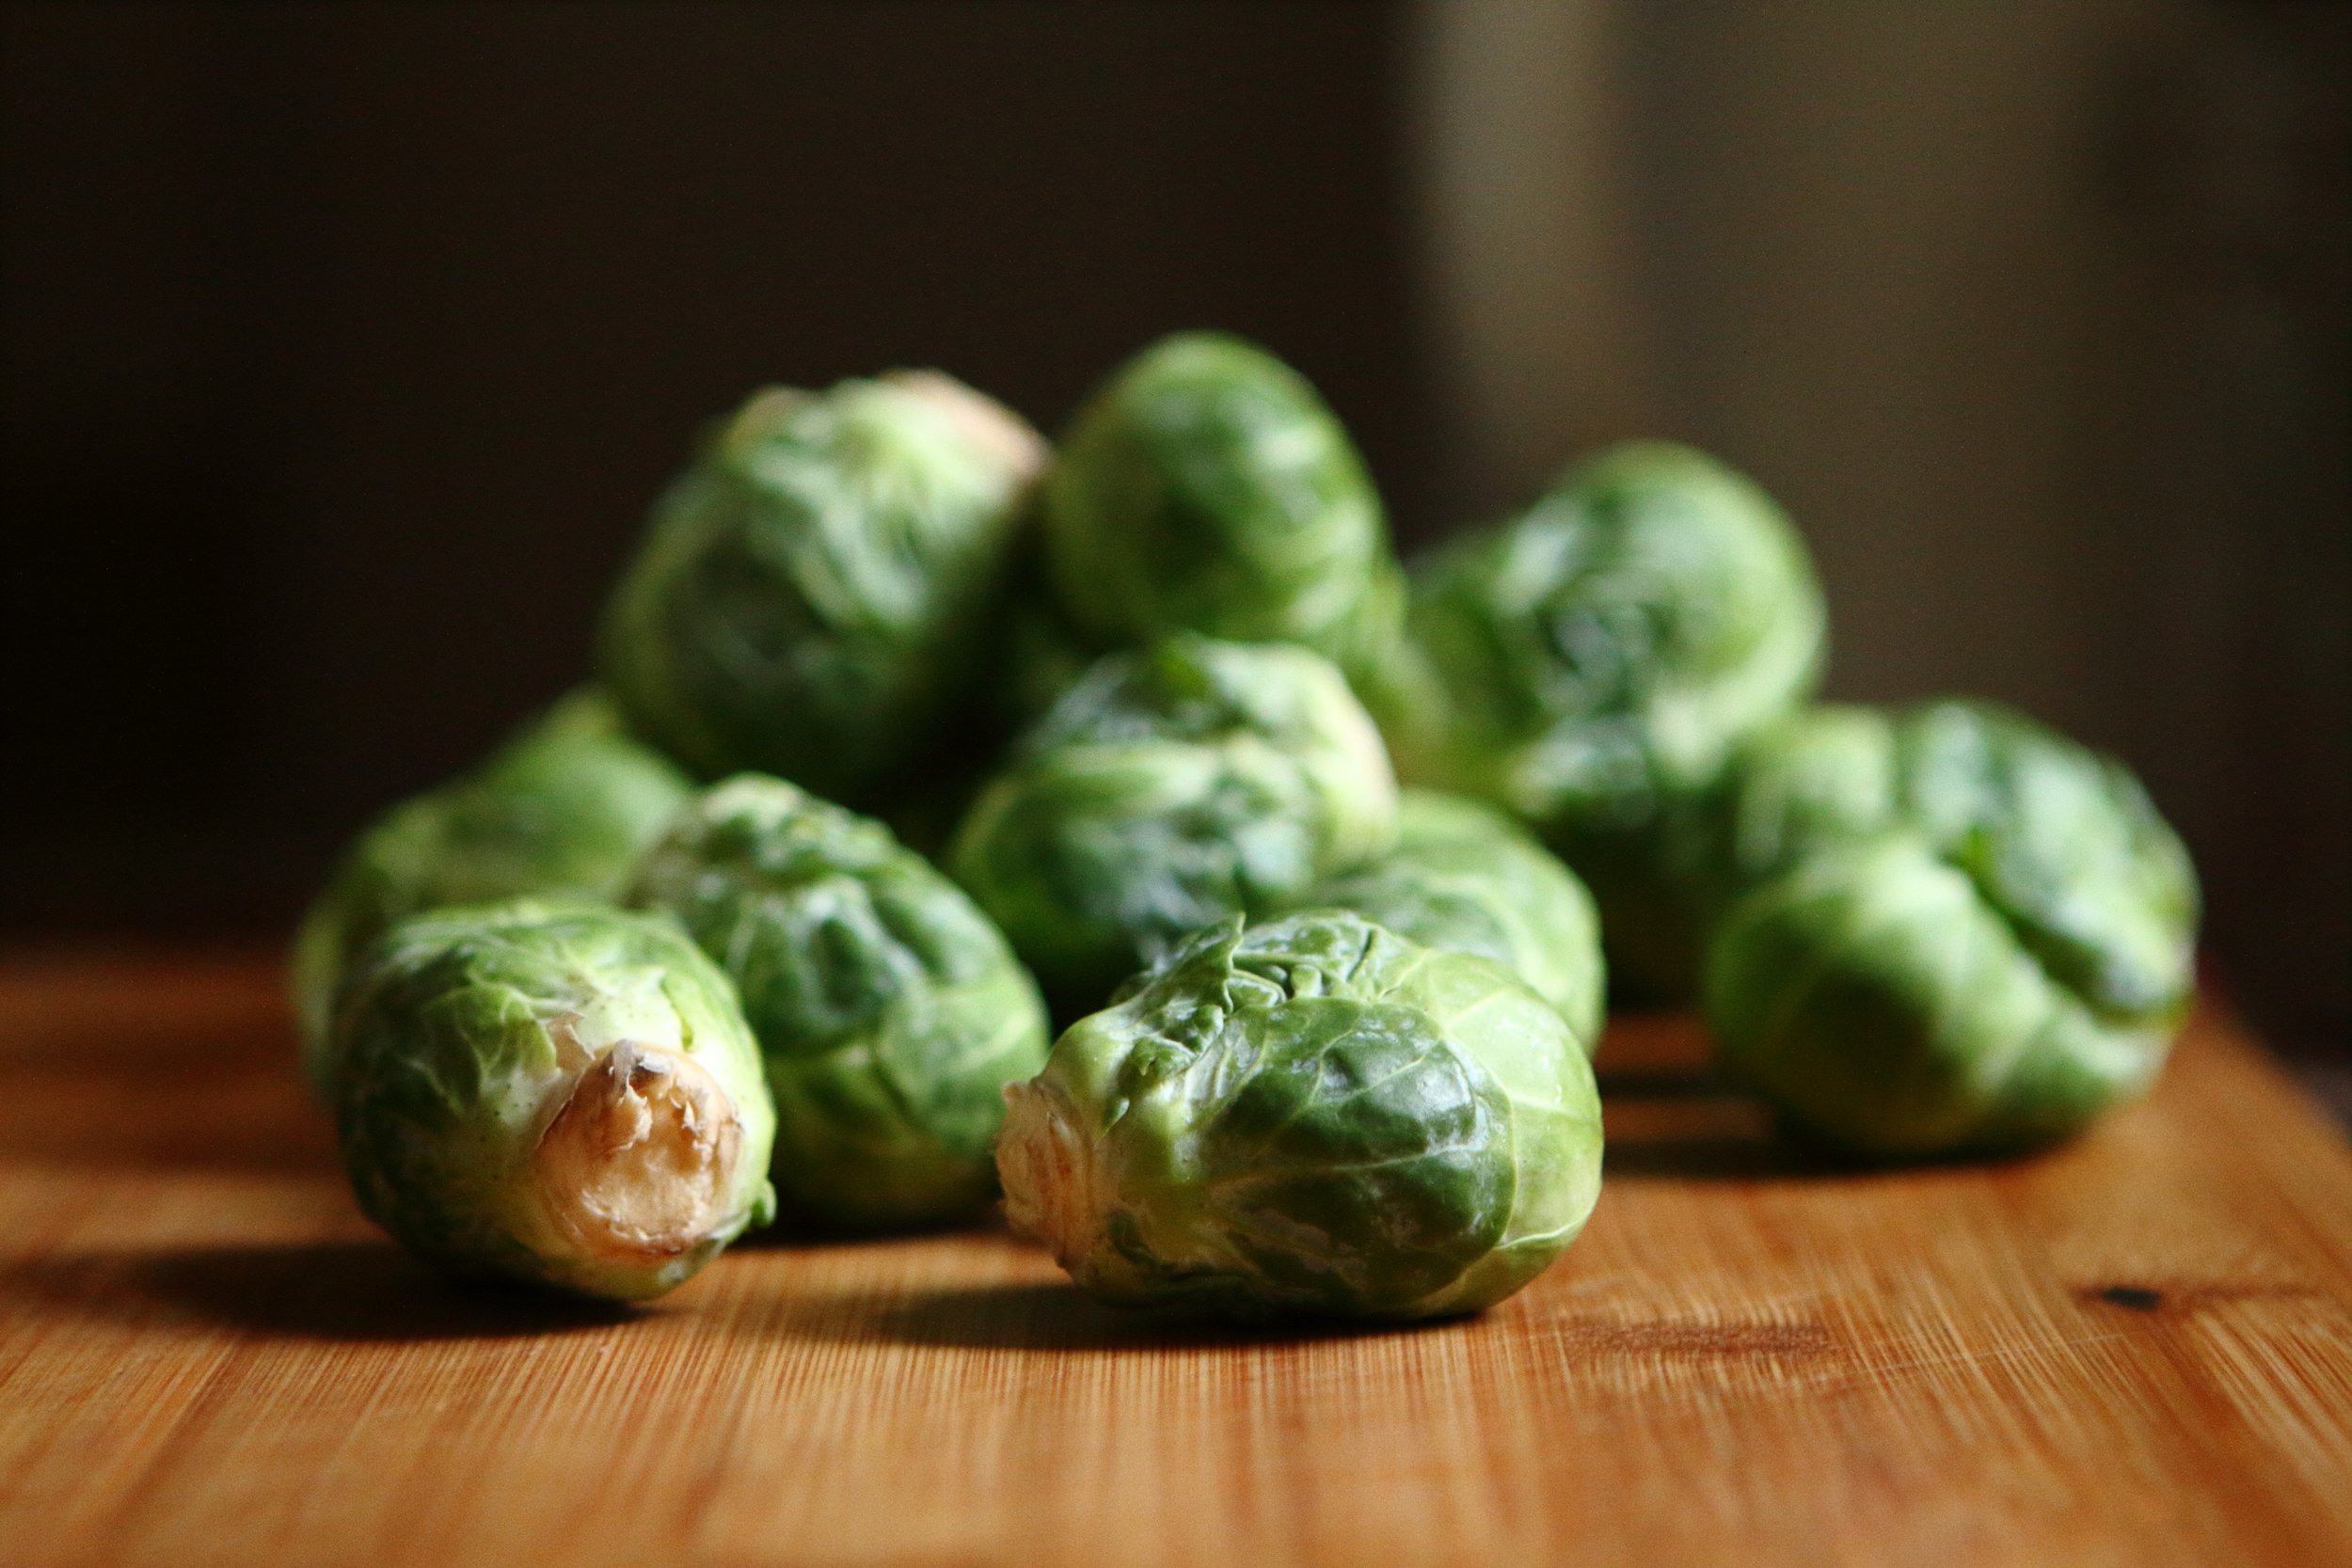 Brussel sprouts are one of the healthiest foods